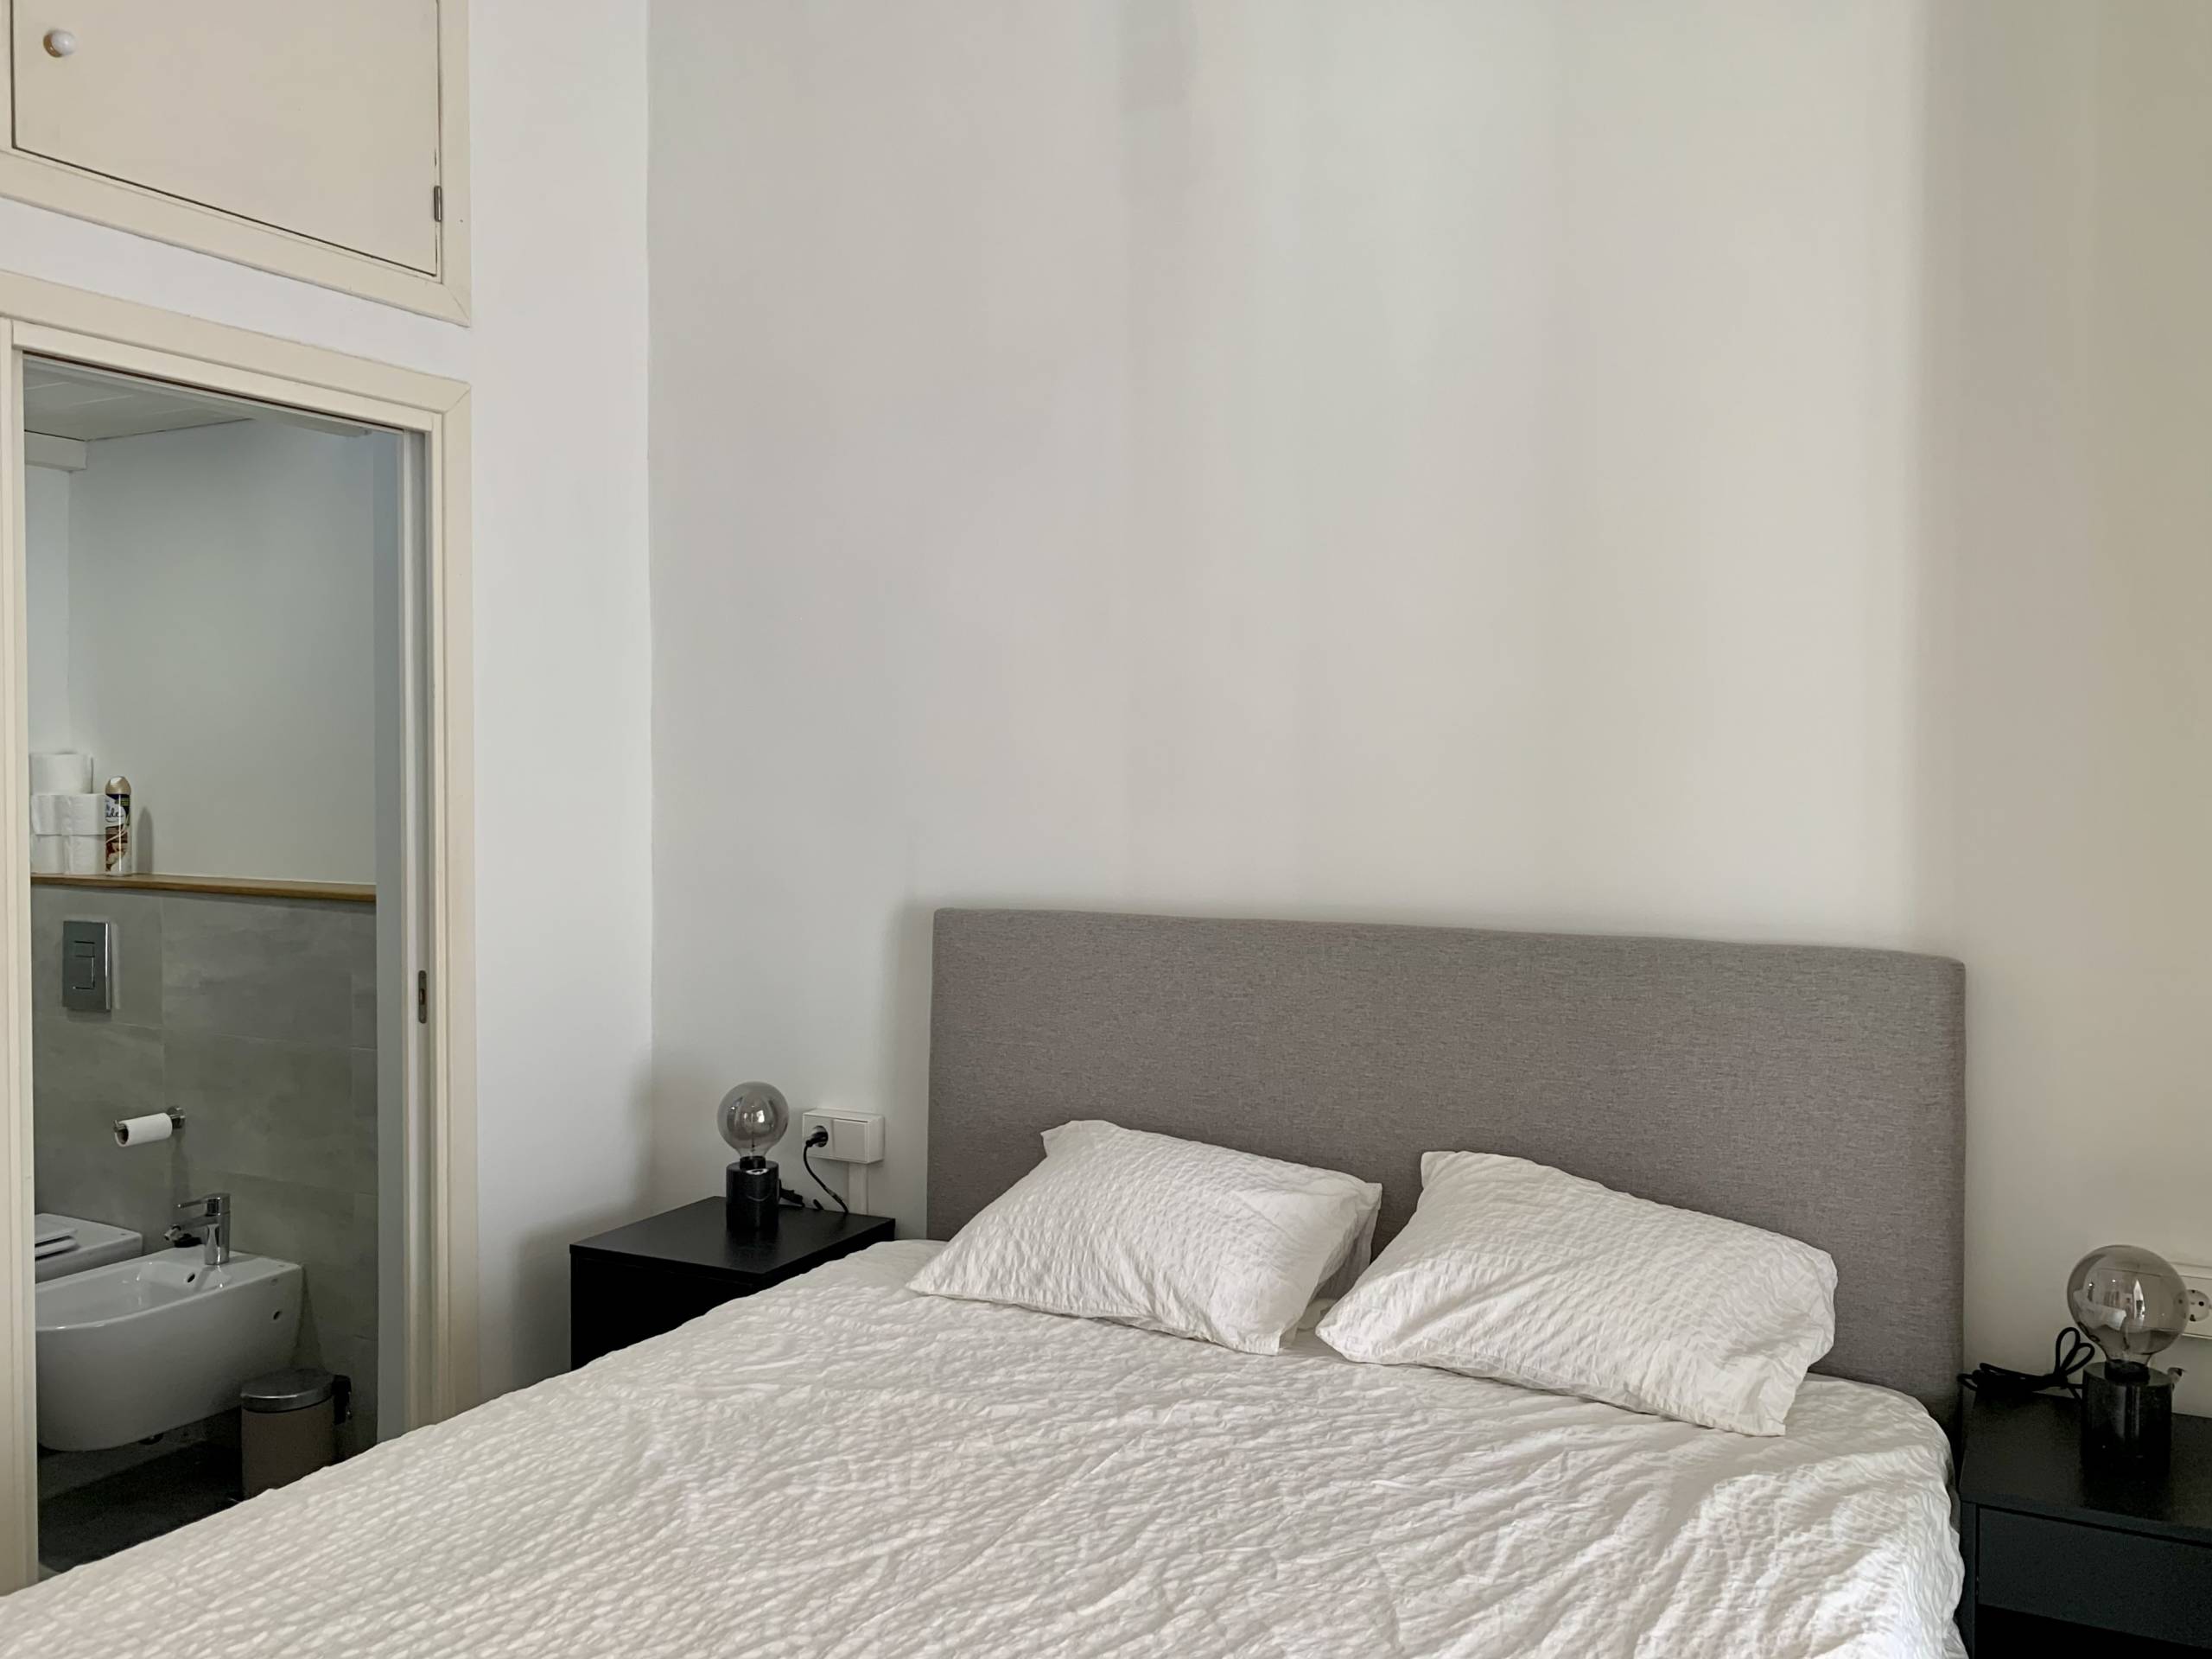 Doña Maria - Beautiful apartment for rent in Valencia